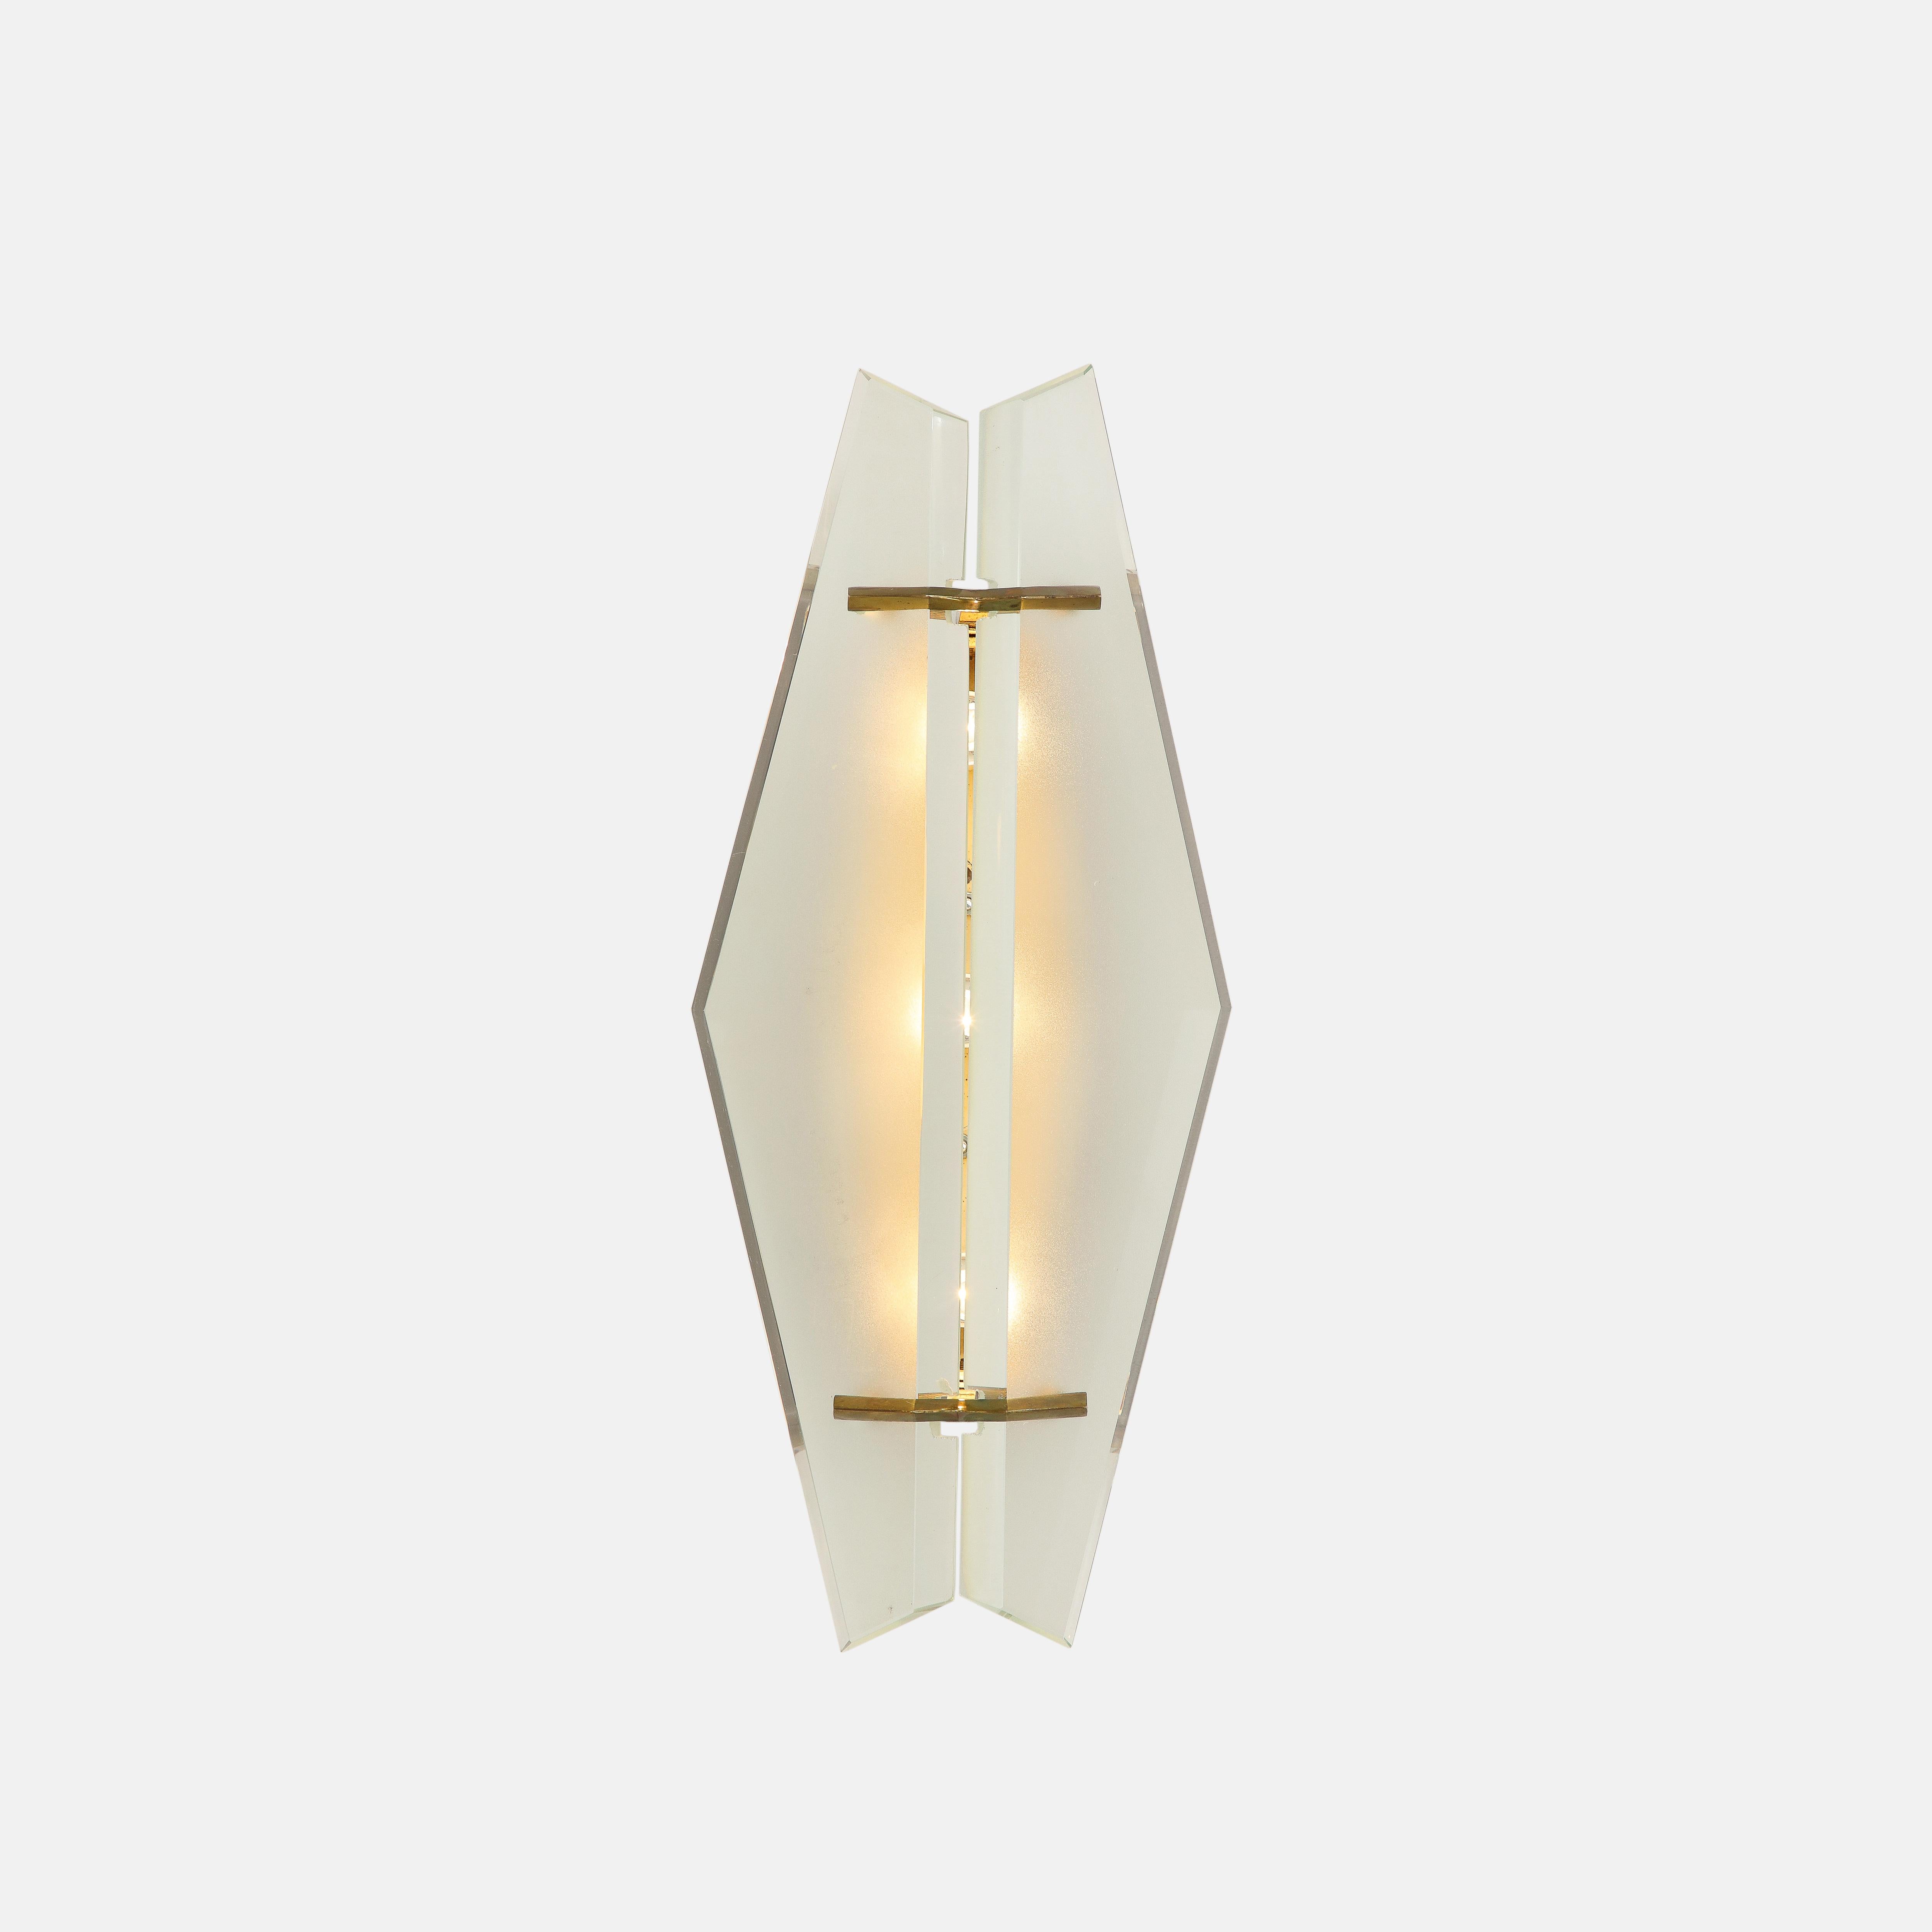 Max Ingrand for Fontana Arte original exquisite pair of modernist sconces model 1943 with two thick triangular beveled satin or acid-etched crystal plates held together at an angle with brass mounts on black enameled metal structure. The thick-cut